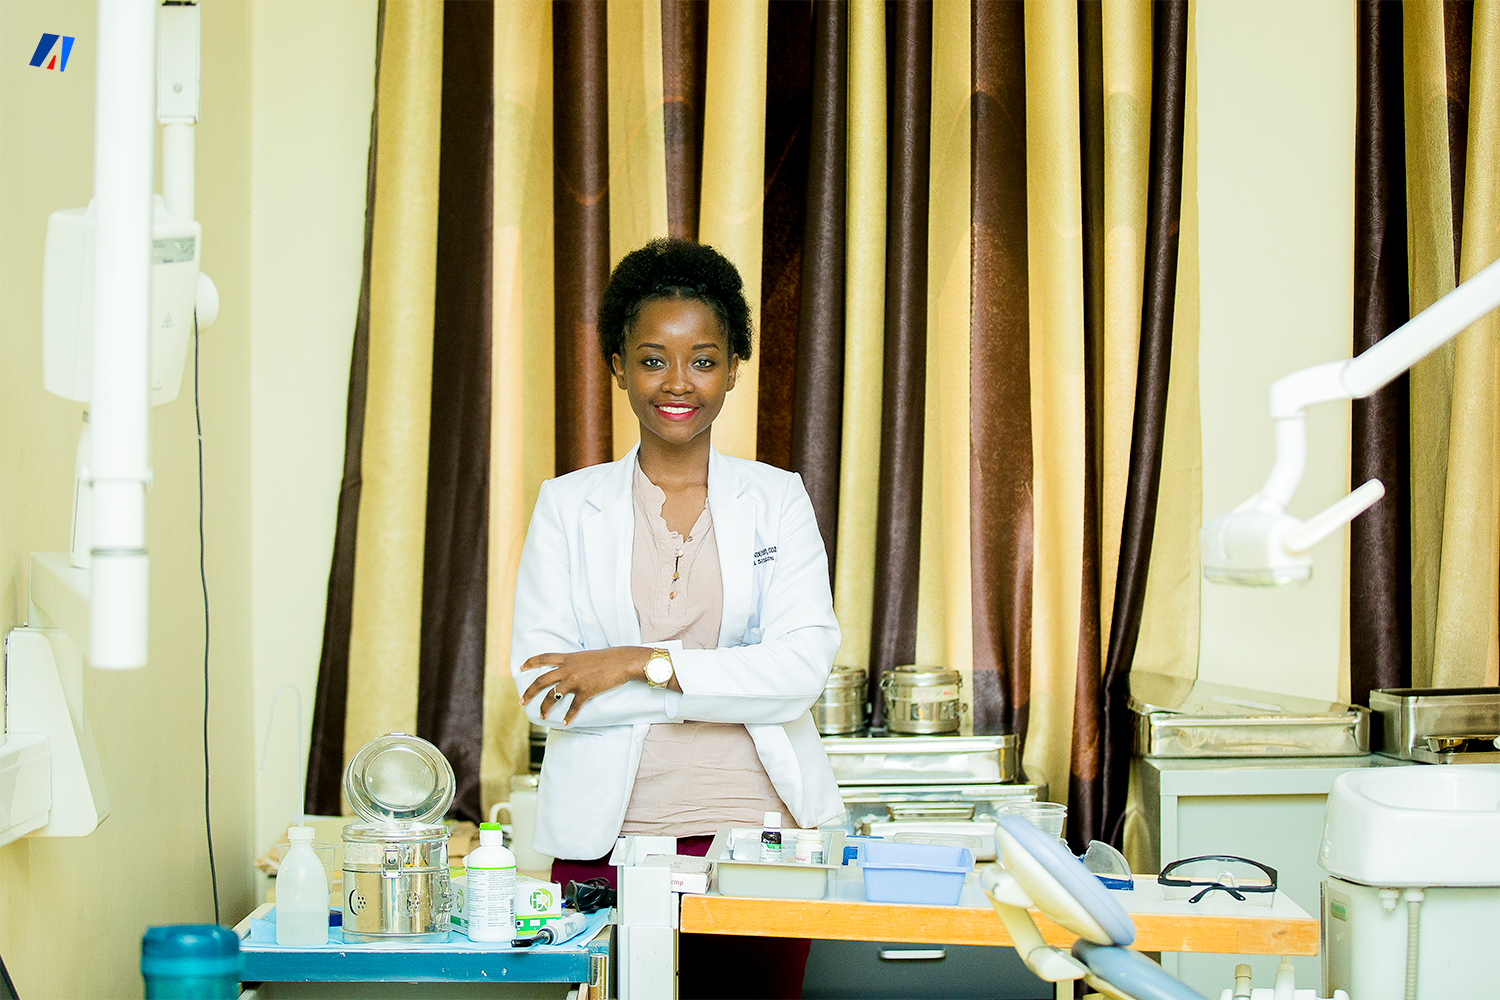 Meet Dr Cynthia NDUWAYO, Dentist at Kira Hospital and founder of BuDental Mission